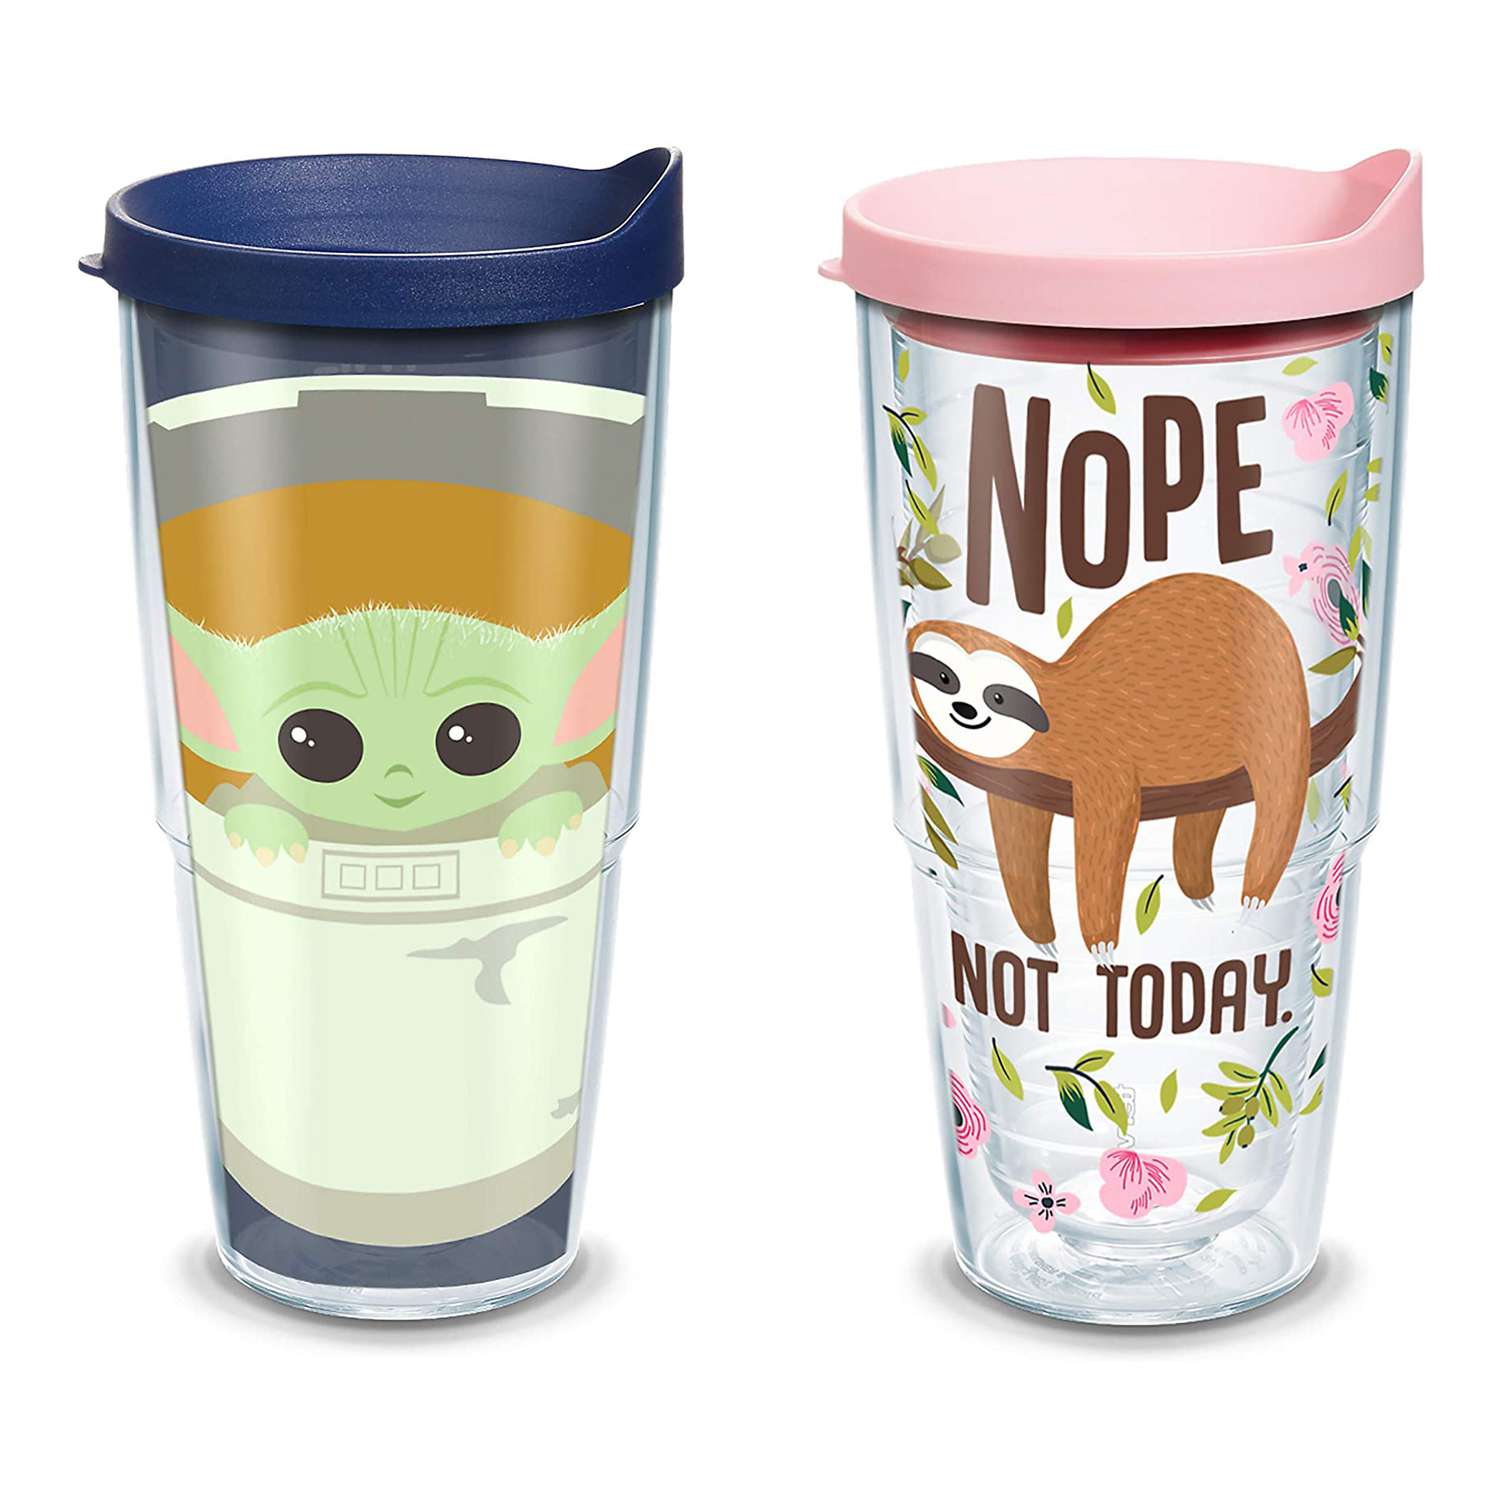 Tervis insulated tumblers